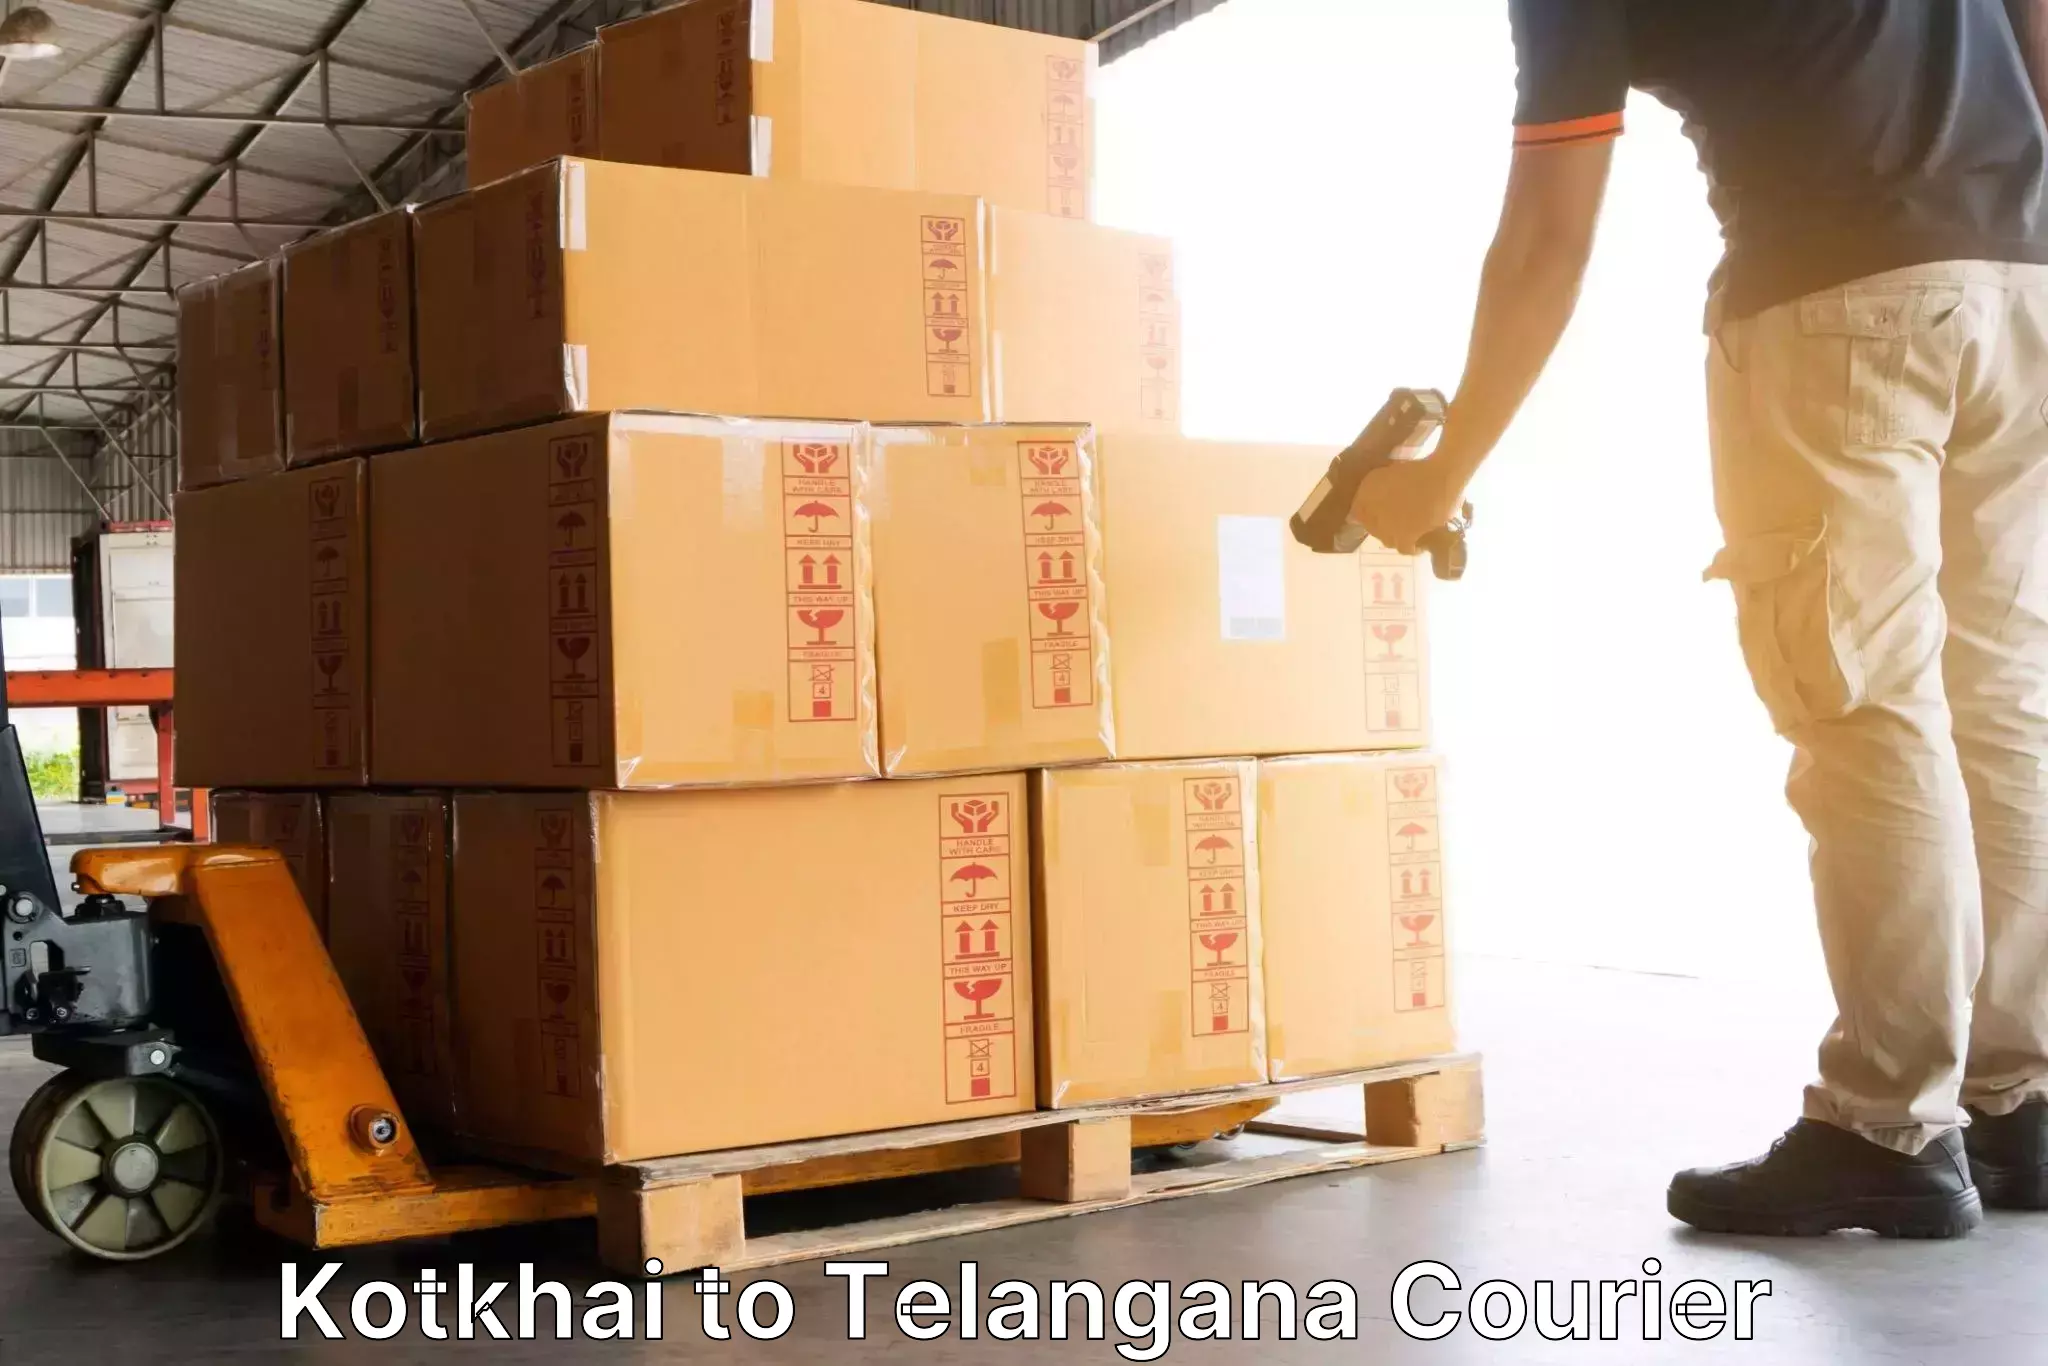 Express courier facilities in Kotkhai to Khammam